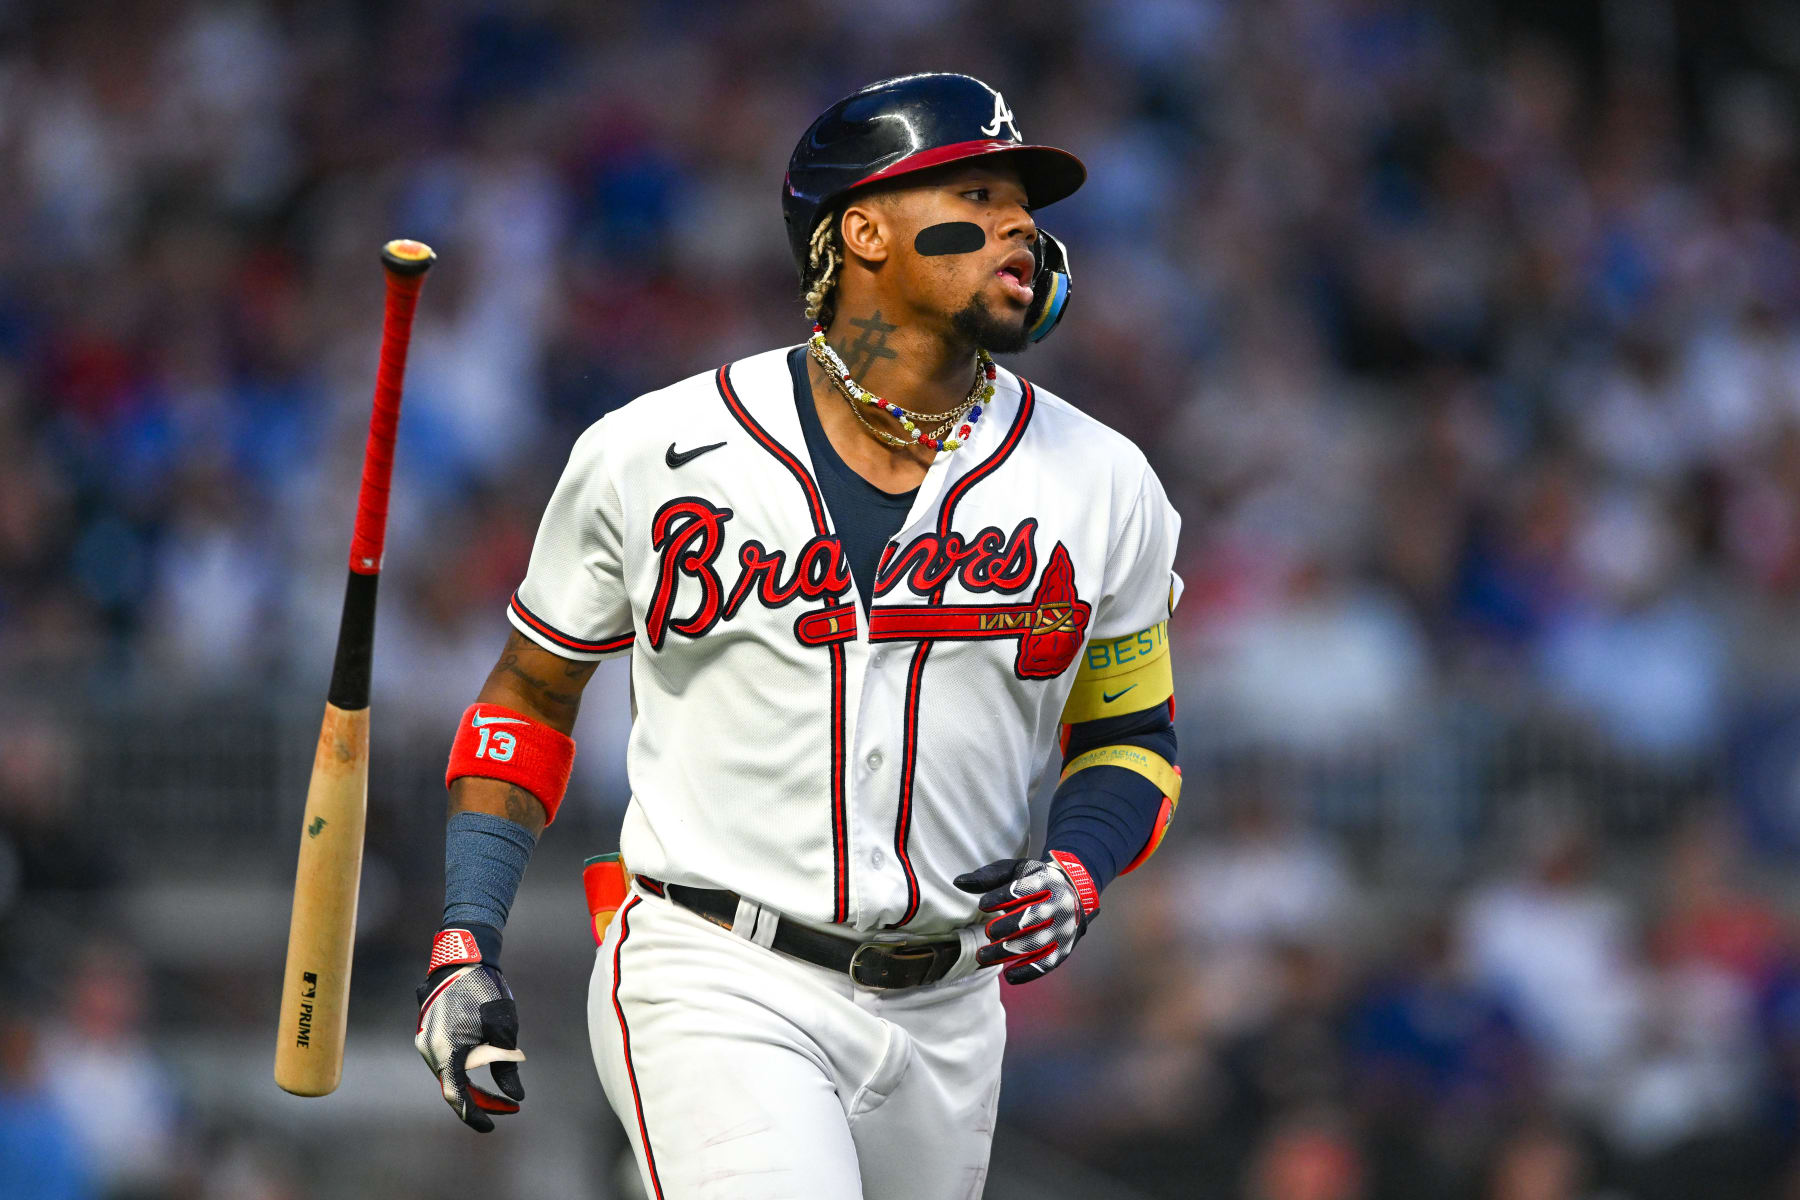 Video: Braves' Ronald Acuña Jr. Becomes 1st Player Ever to Hit 40